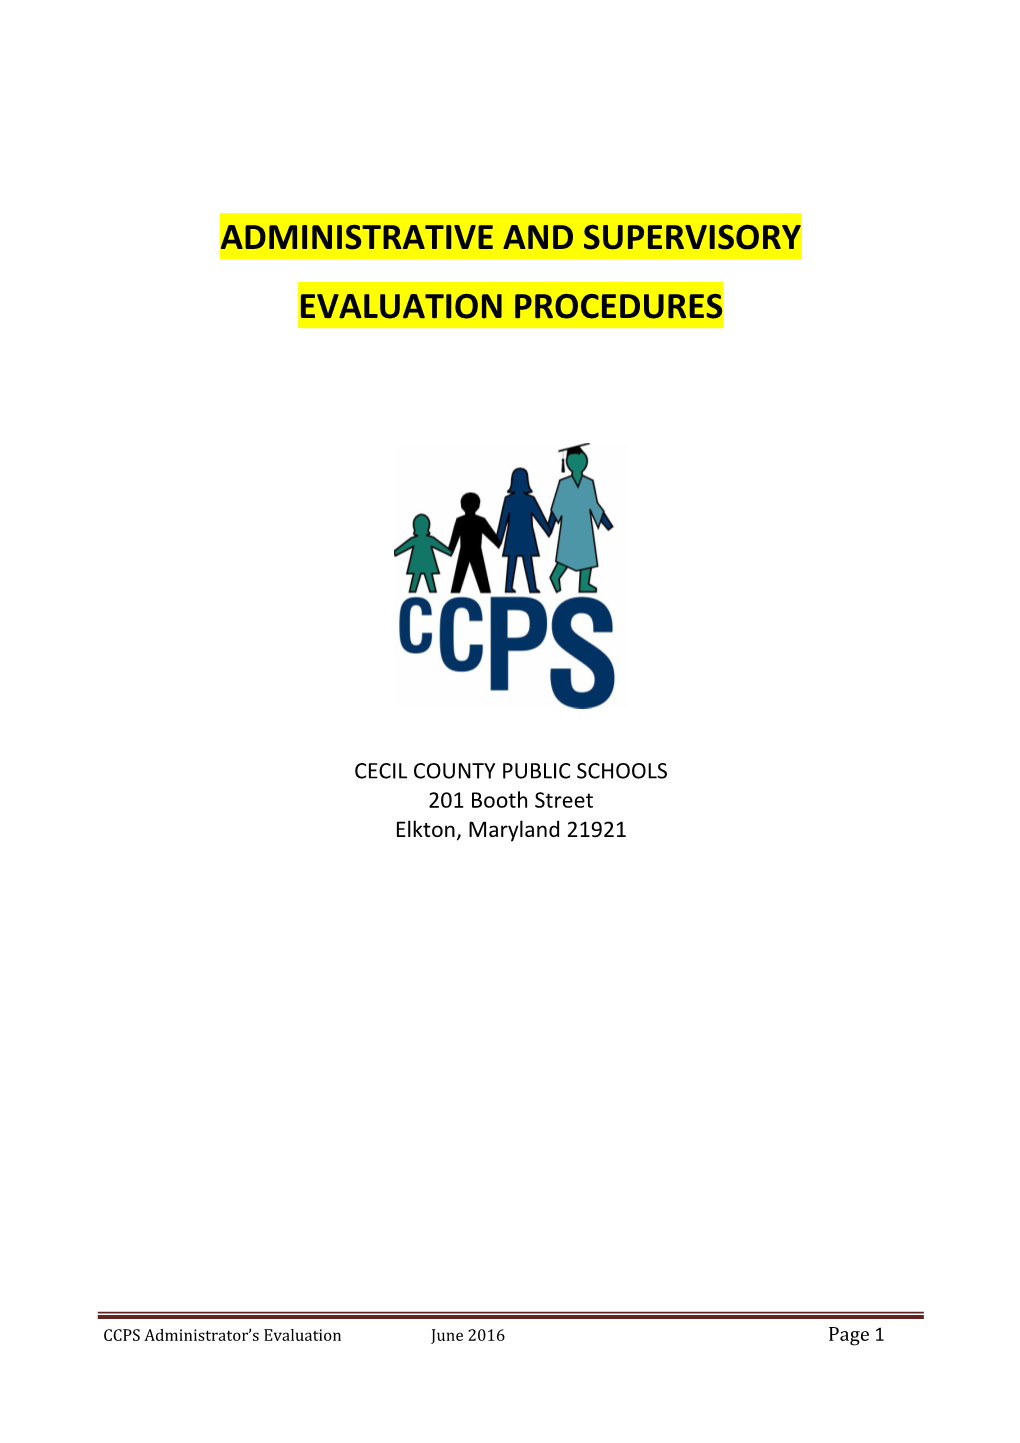 Administrative and Supervisory